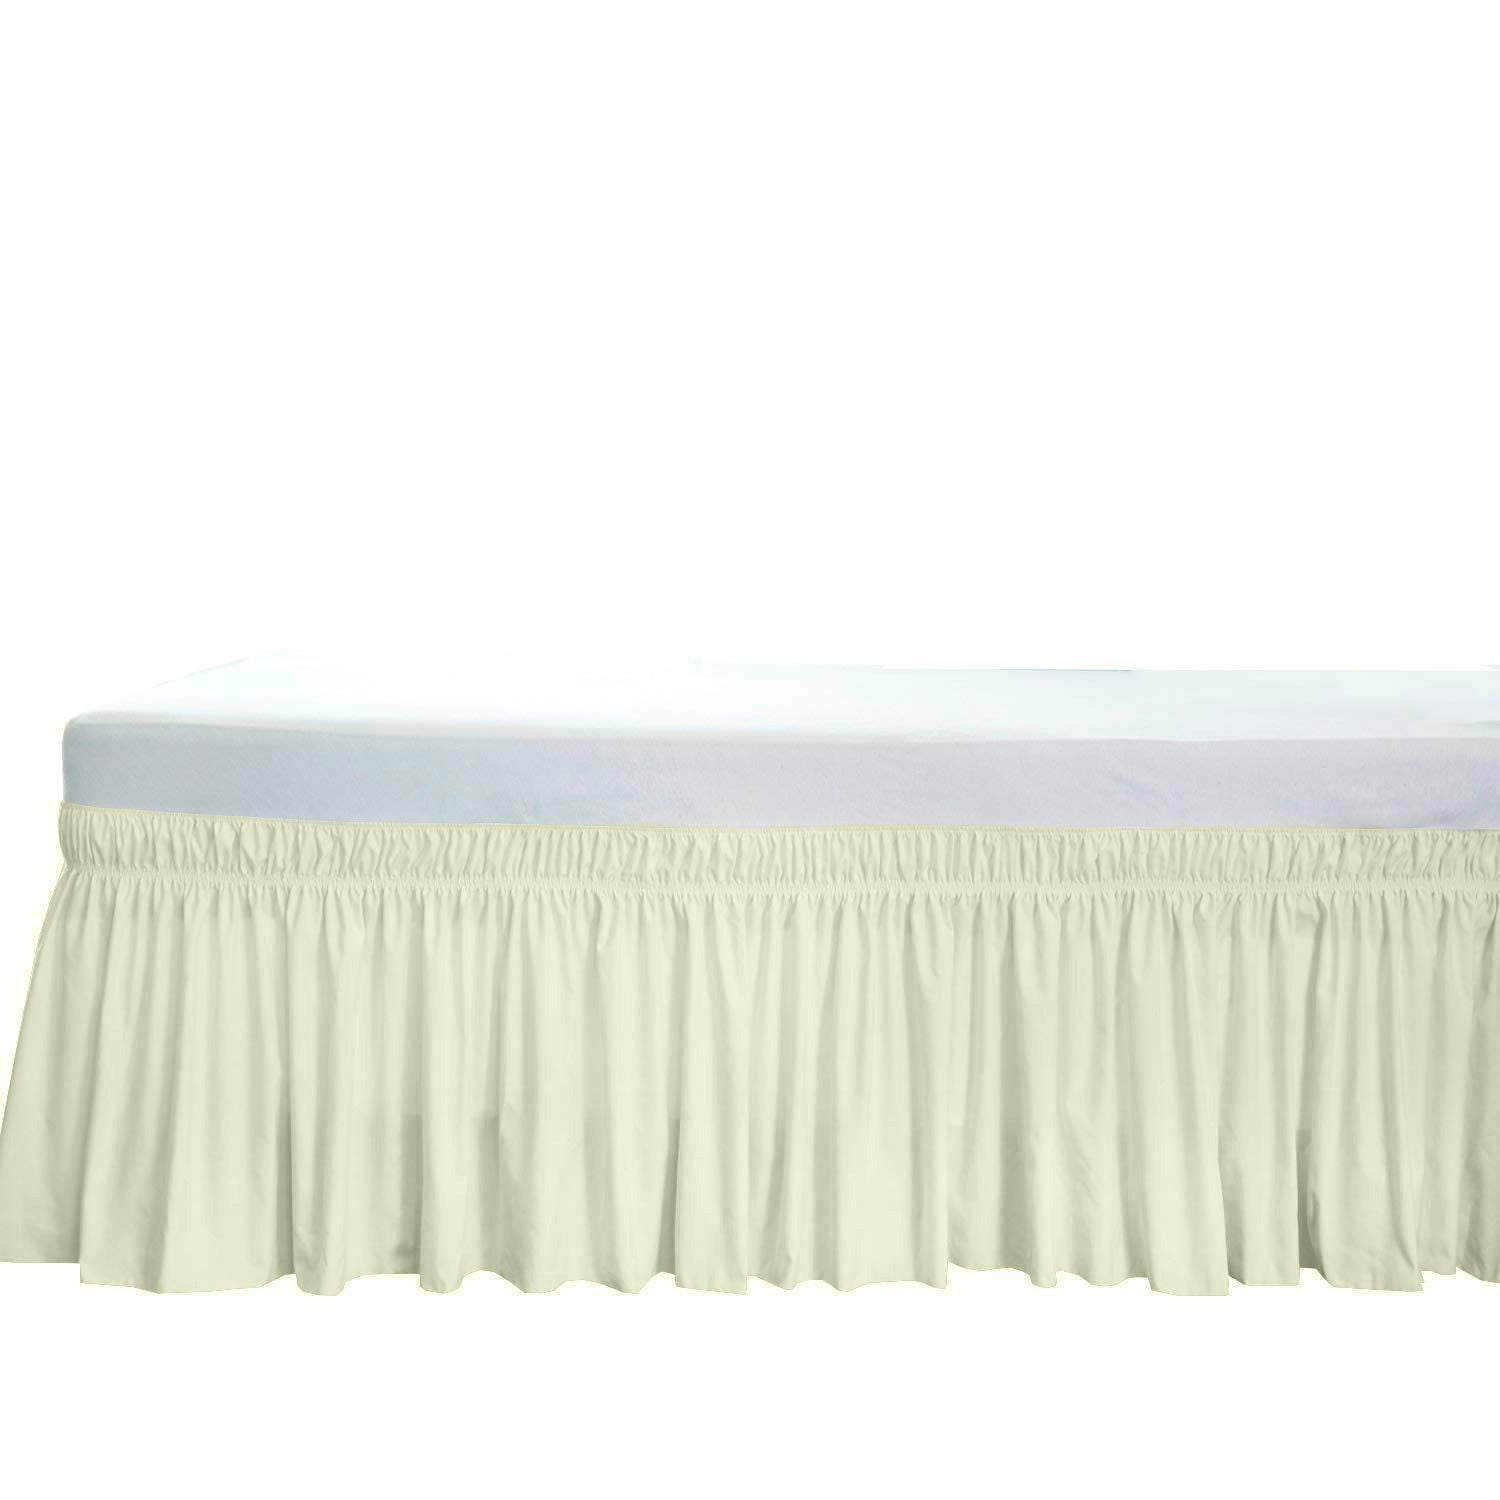 Ivory Solid} 15 Drop Length Hotel Quality 600TC 1PC Pleated Bed Skirt 100% Egyptian Cotton 600 Thread Count {King